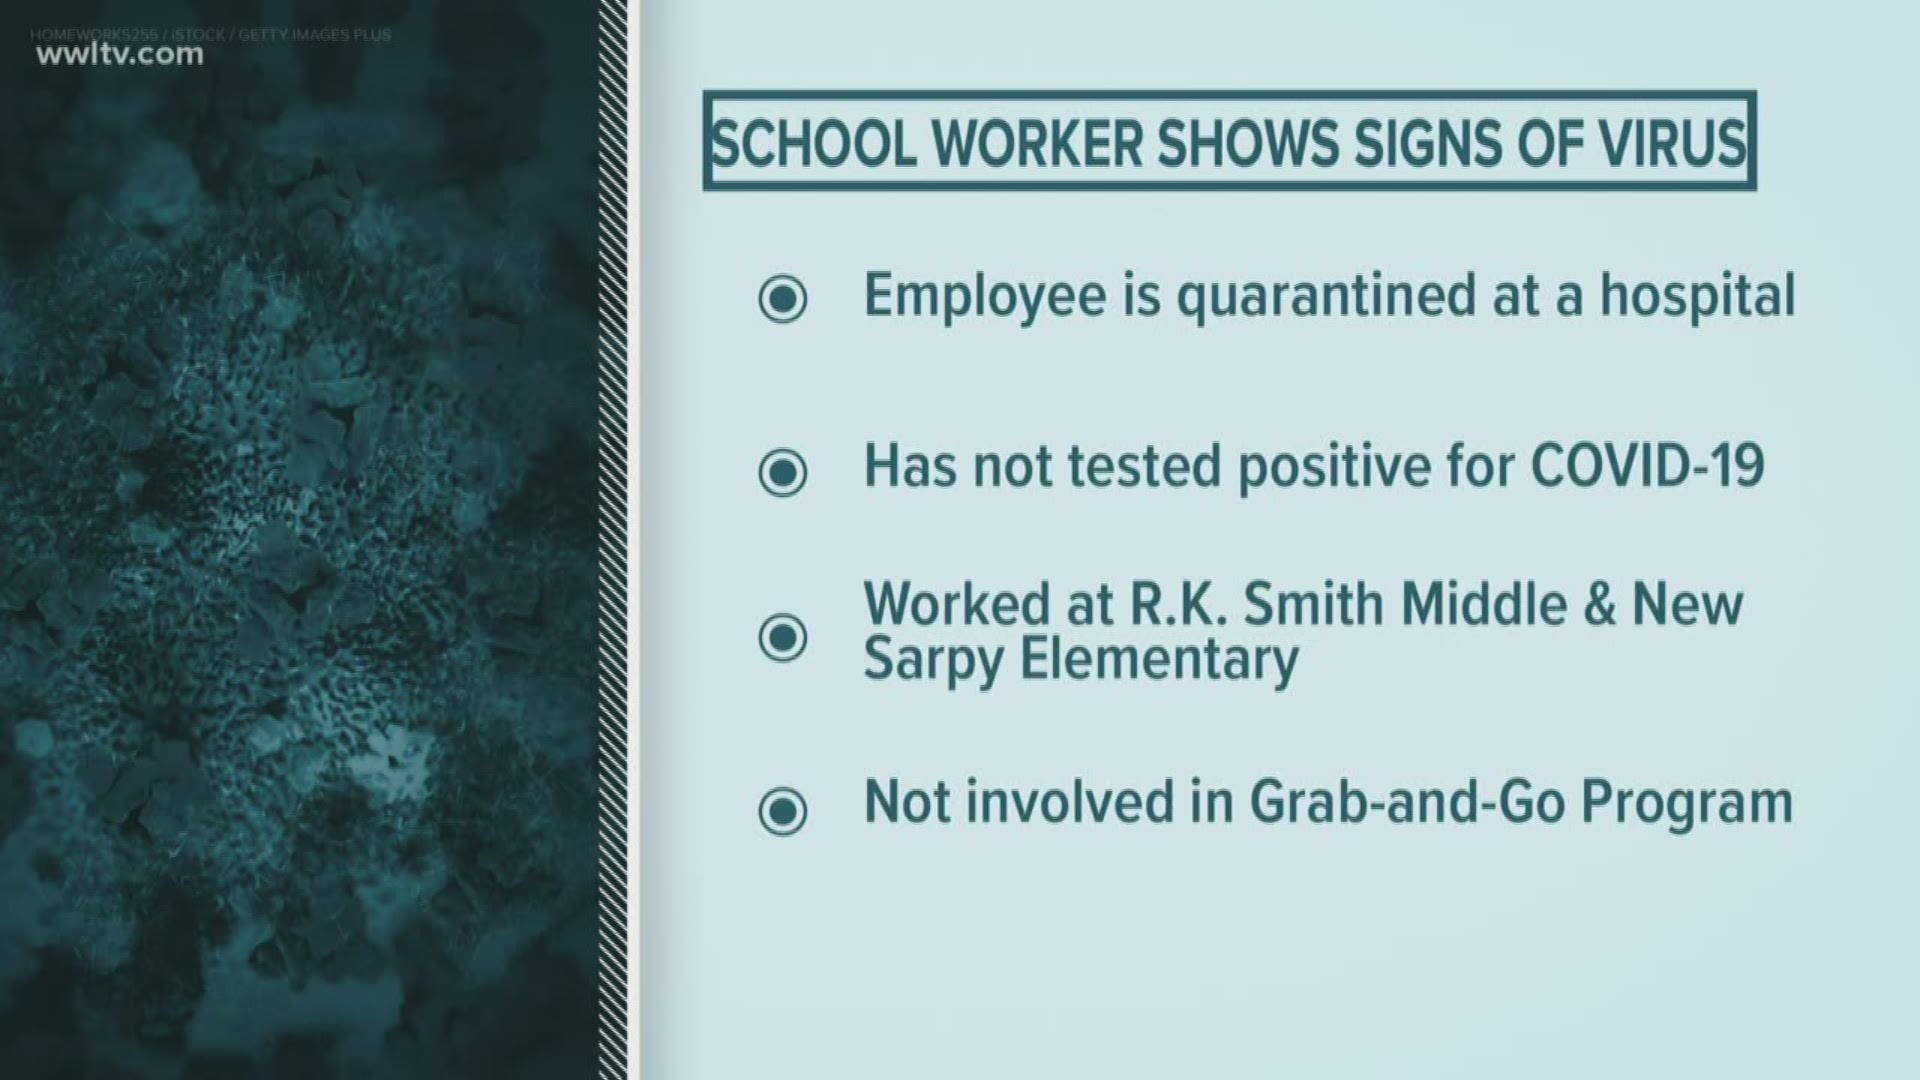 An employee who worked at R.K. Smith Middle School and New Sarpy Elementary School was quarantined at a hospital.